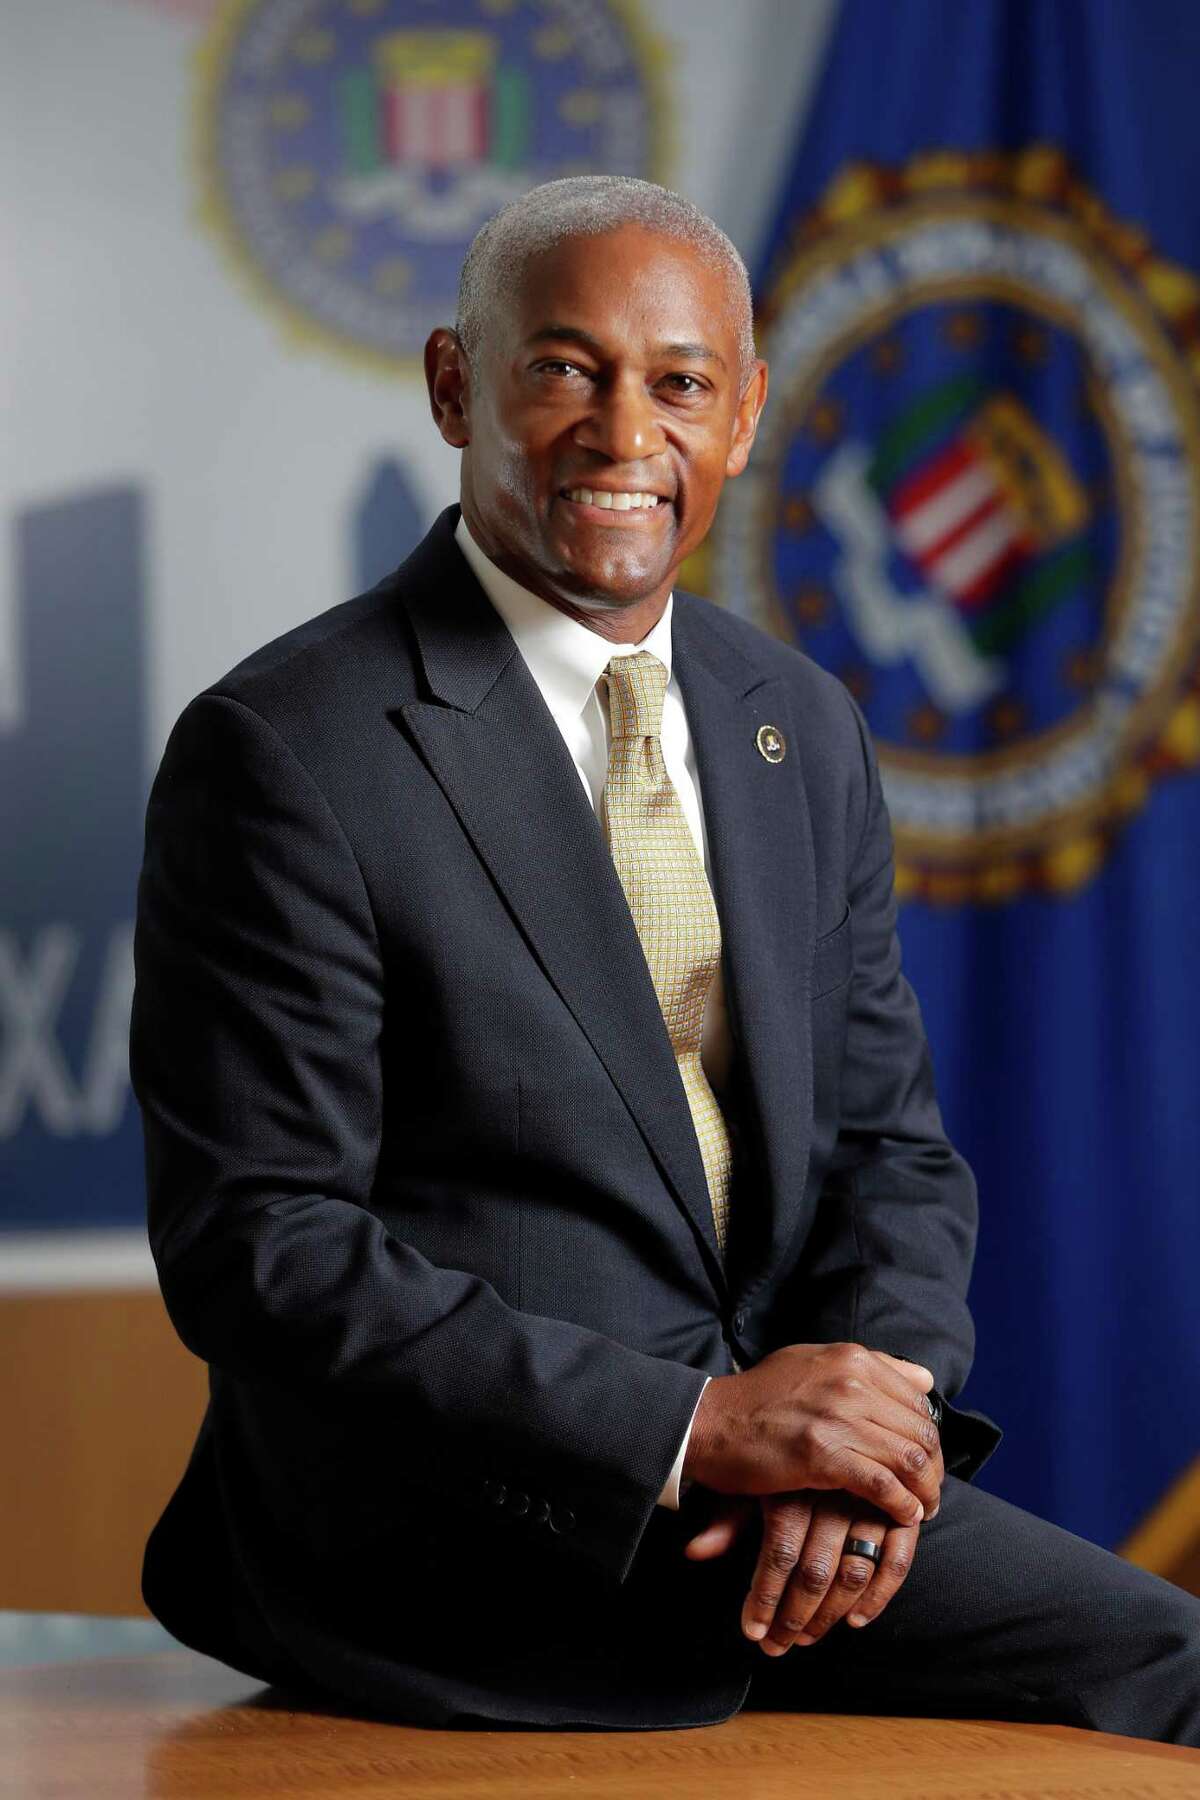 James Smith, the new special agent in charge of the Federal Bureau of Investigation Field Office, in the office conference room Friday, July 1, 2022 in Houston, TX.